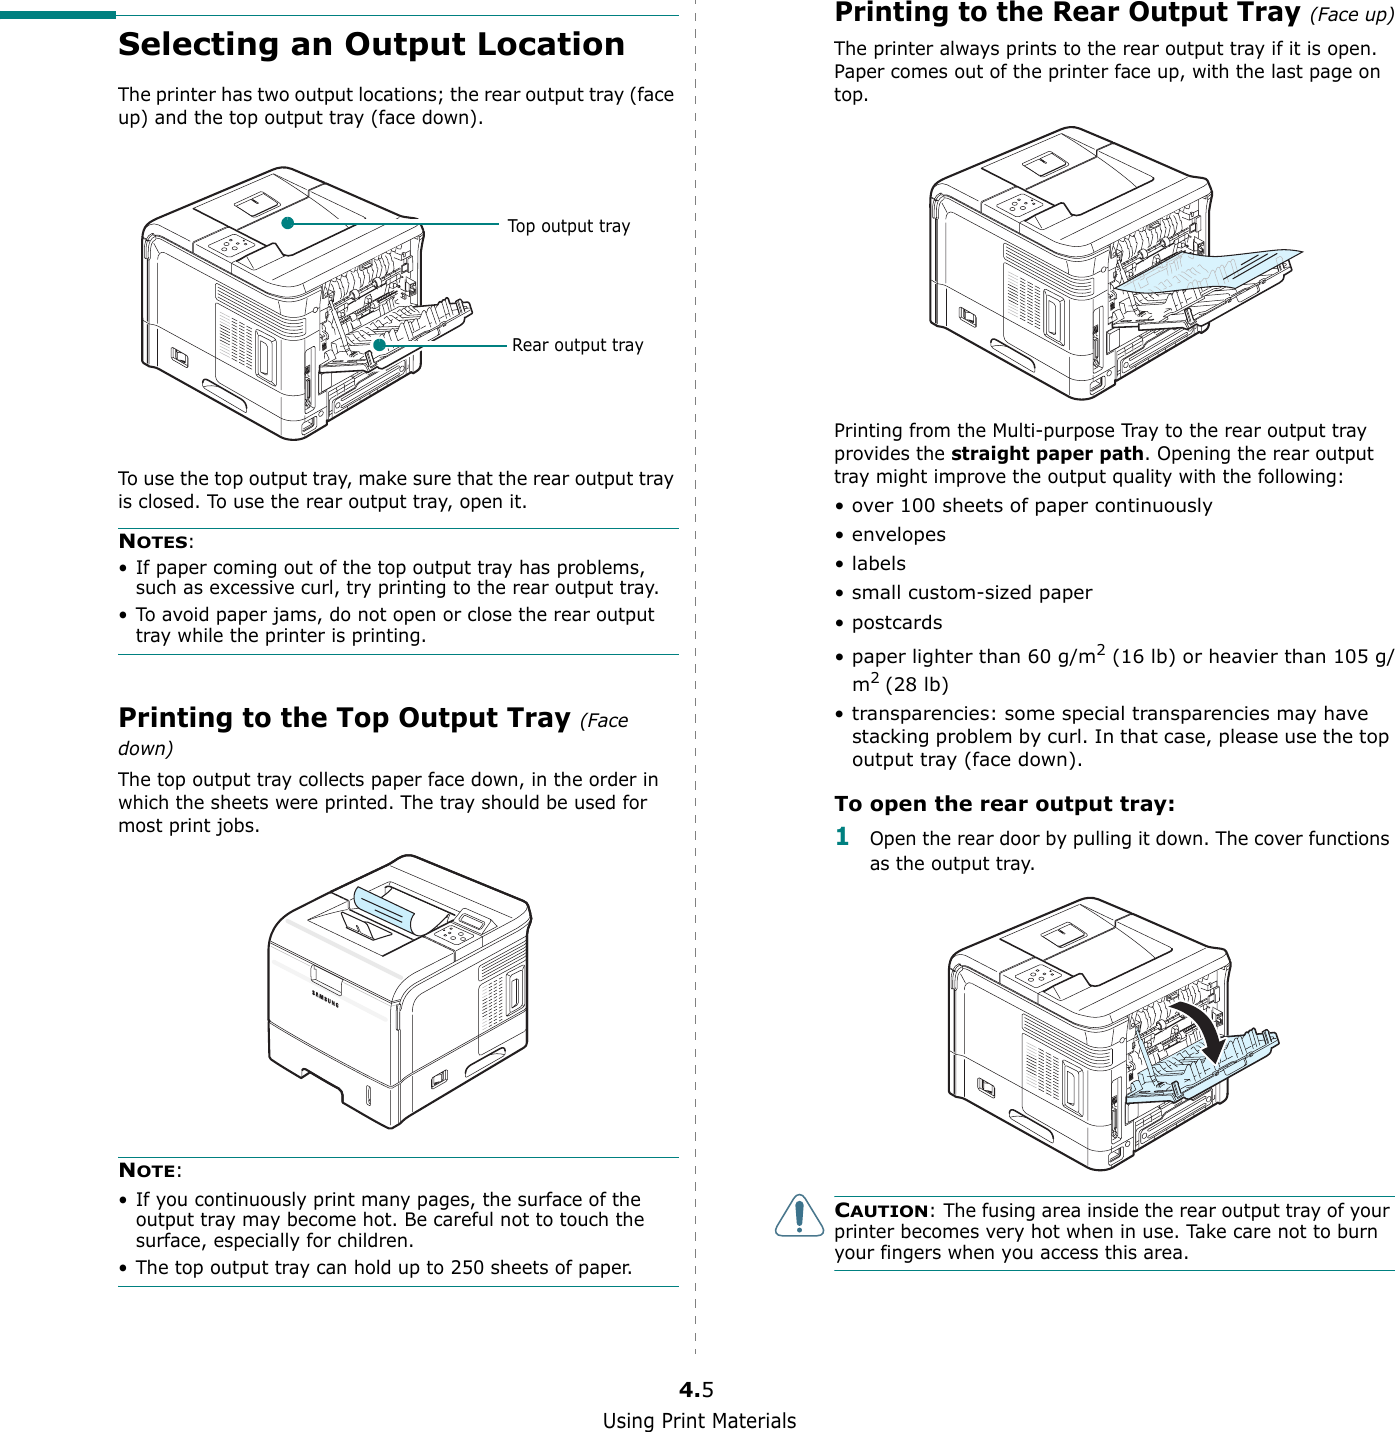 Using Print Materials4.5Selecting an Output LocationThe printer has two output locations; the rear output tray (face up) and the top output tray (face down). To use the top output tray, make sure that the rear output tray is closed. To use the rear output tray, open it.NOTES:• If paper coming out of the top output tray has problems, such as excessive curl, try printing to the rear output tray.• To avoid paper jams, do not open or close the rear output tray while the printer is printing.Printing to the Top Output Tray (Face down)The top output tray collects paper face down, in the order in which the sheets were printed. The tray should be used for most print jobs.NOTE: • If you continuously print many pages, the surface of the output tray may become hot. Be careful not to touch the surface, especially for children.• The top output tray can hold up to 250 sheets of paper. Top output trayRear output trayPrinting to the Rear Output Tray (Face up)The printer always prints to the rear output tray if it is open. Paper comes out of the printer face up, with the last page on top.Printing from the Multi-purpose Tray to the rear output tray provides the straight paper path. Opening the rear output tray might improve the output quality with the following:• over 100 sheets of paper continuously•envelopes•labels• small custom-sized paper•postcards• paper lighter than 60 g/m2 (16 lb) or heavier than 105 g/m2 (28 lb)• transparencies: some special transparencies may have stacking problem by curl. In that case, please use the top output tray (face down).To open the rear output tray:1Open the rear door by pulling it down. The cover functions as the output tray.CAUTION: The fusing area inside the rear output tray of your printer becomes very hot when in use. Take care not to burn your fingers when you access this area.